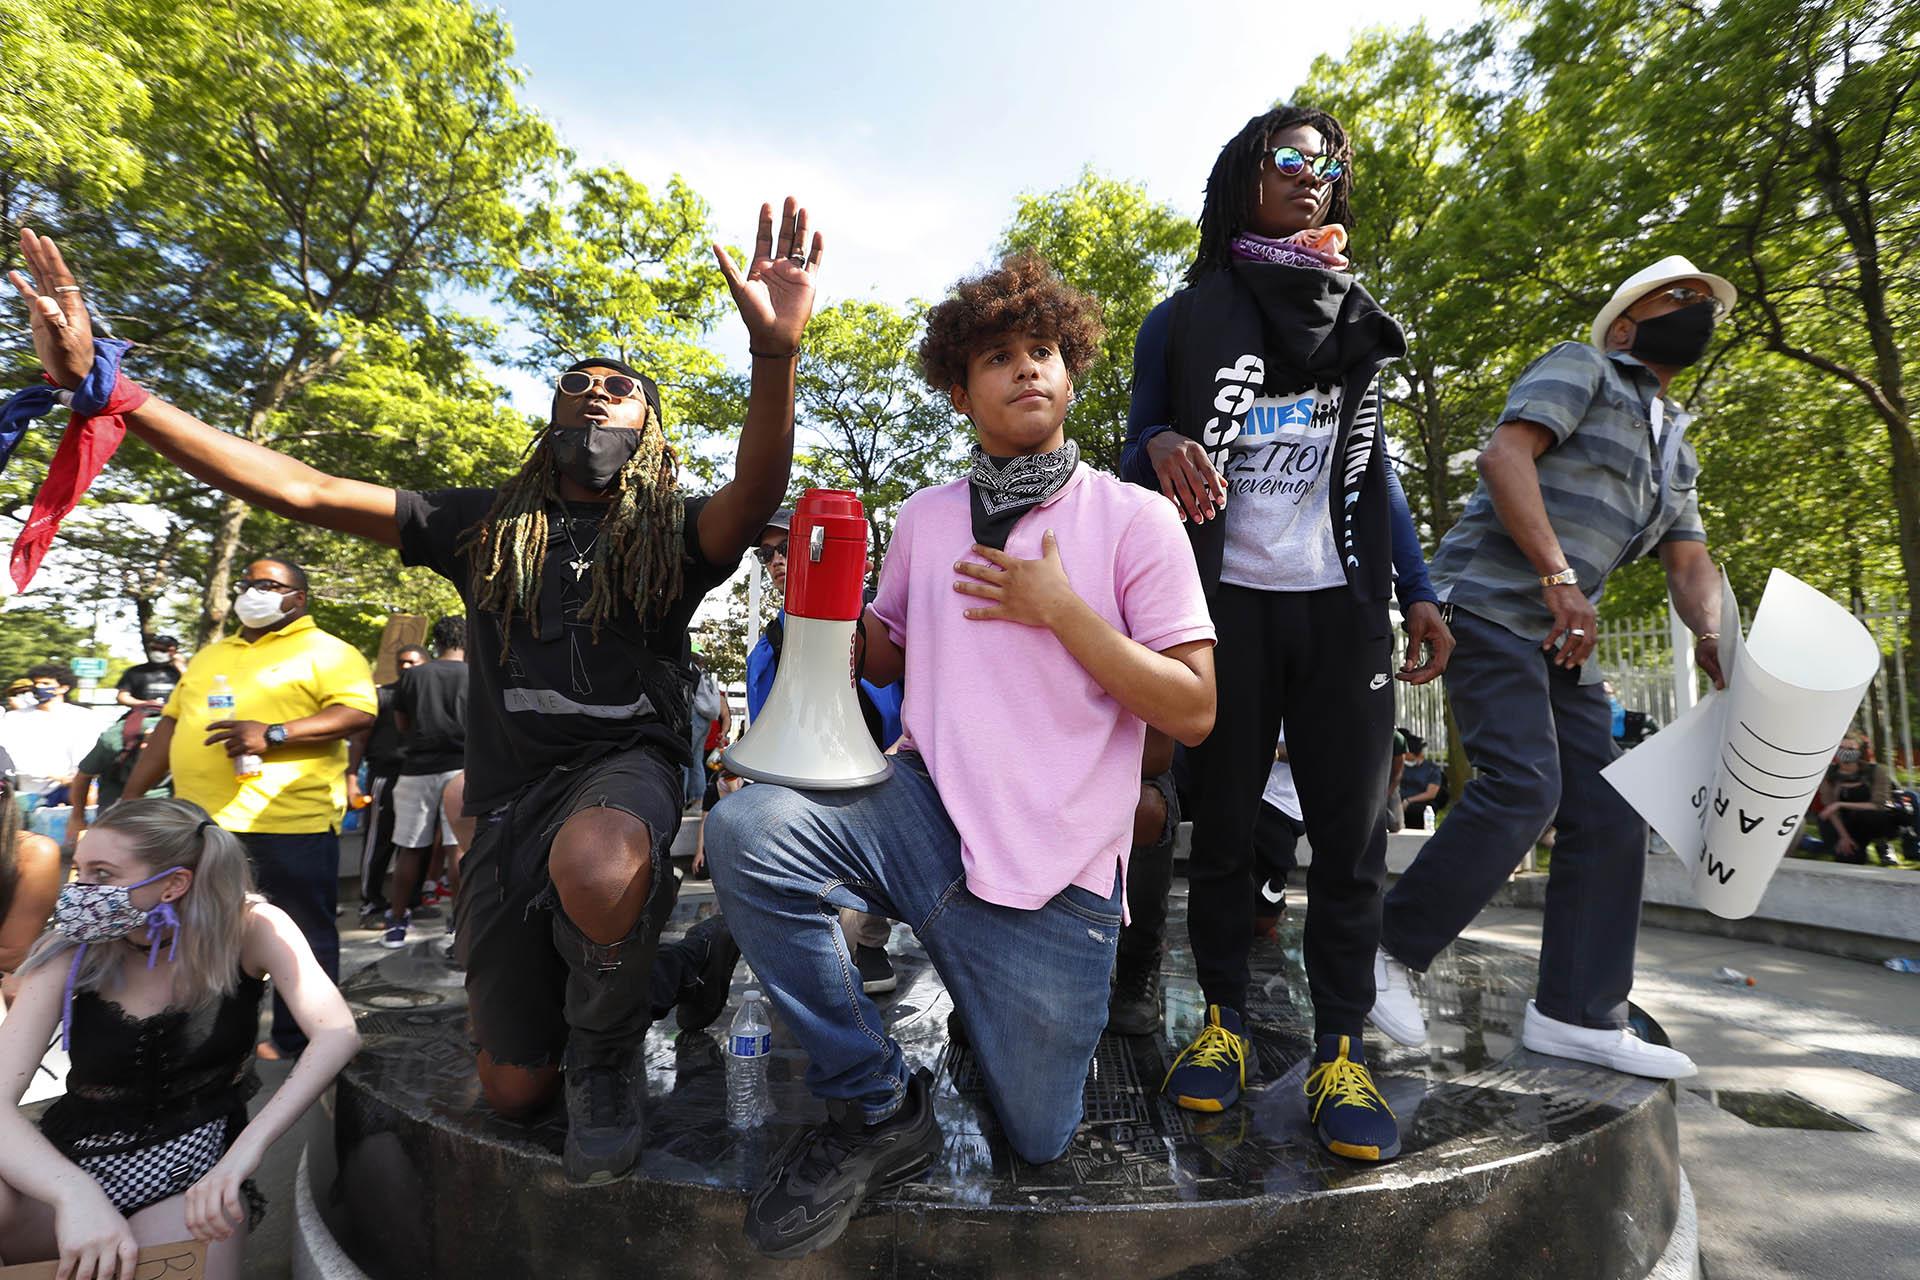 In this June 3, 2020 file photo, Stefan Perez, second from left, addresses a crowd at a rally in Detroit over the death of George Floyd. (AP Photo / Paul Sancya)